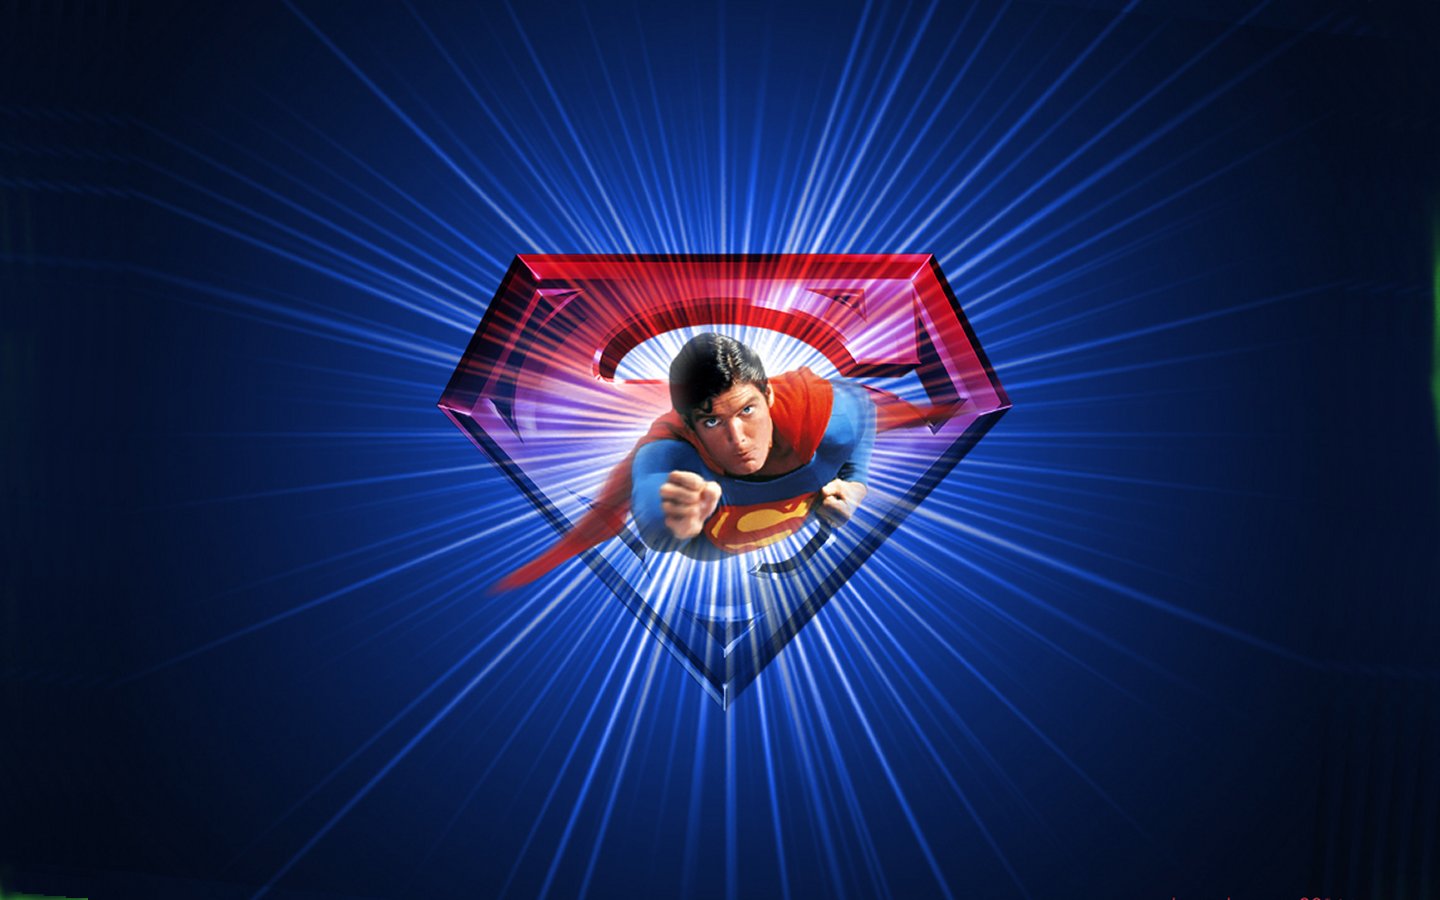 another cool Superman Wallpaper